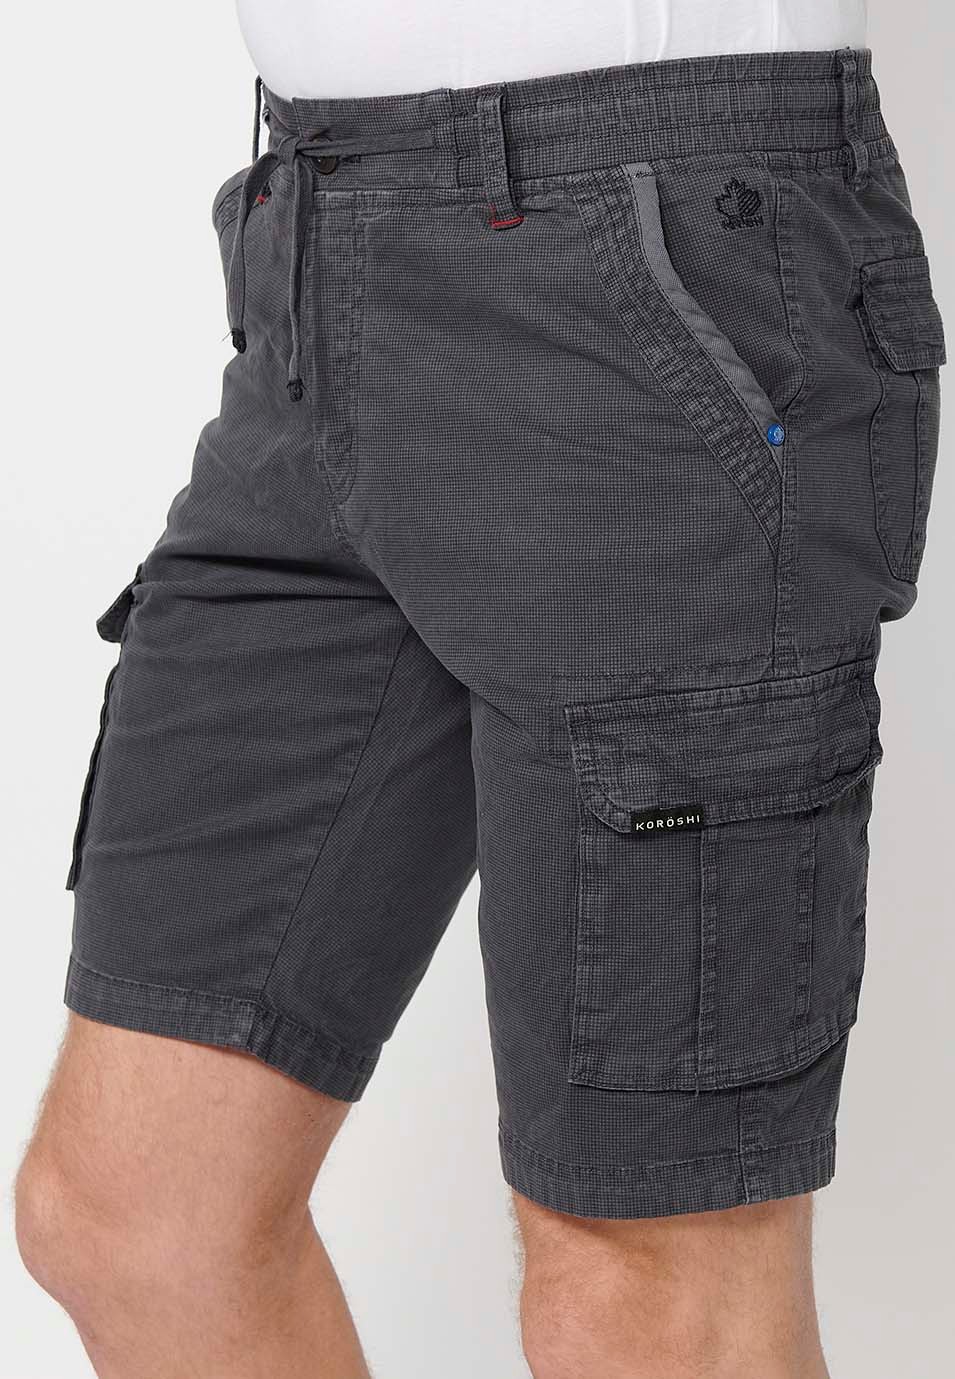 Cargo shorts with front closure with zipper and button and four pockets, two rear pockets with flap with two cargo pockets with flap and adjustable waist with drawstring in Gray for Men 6